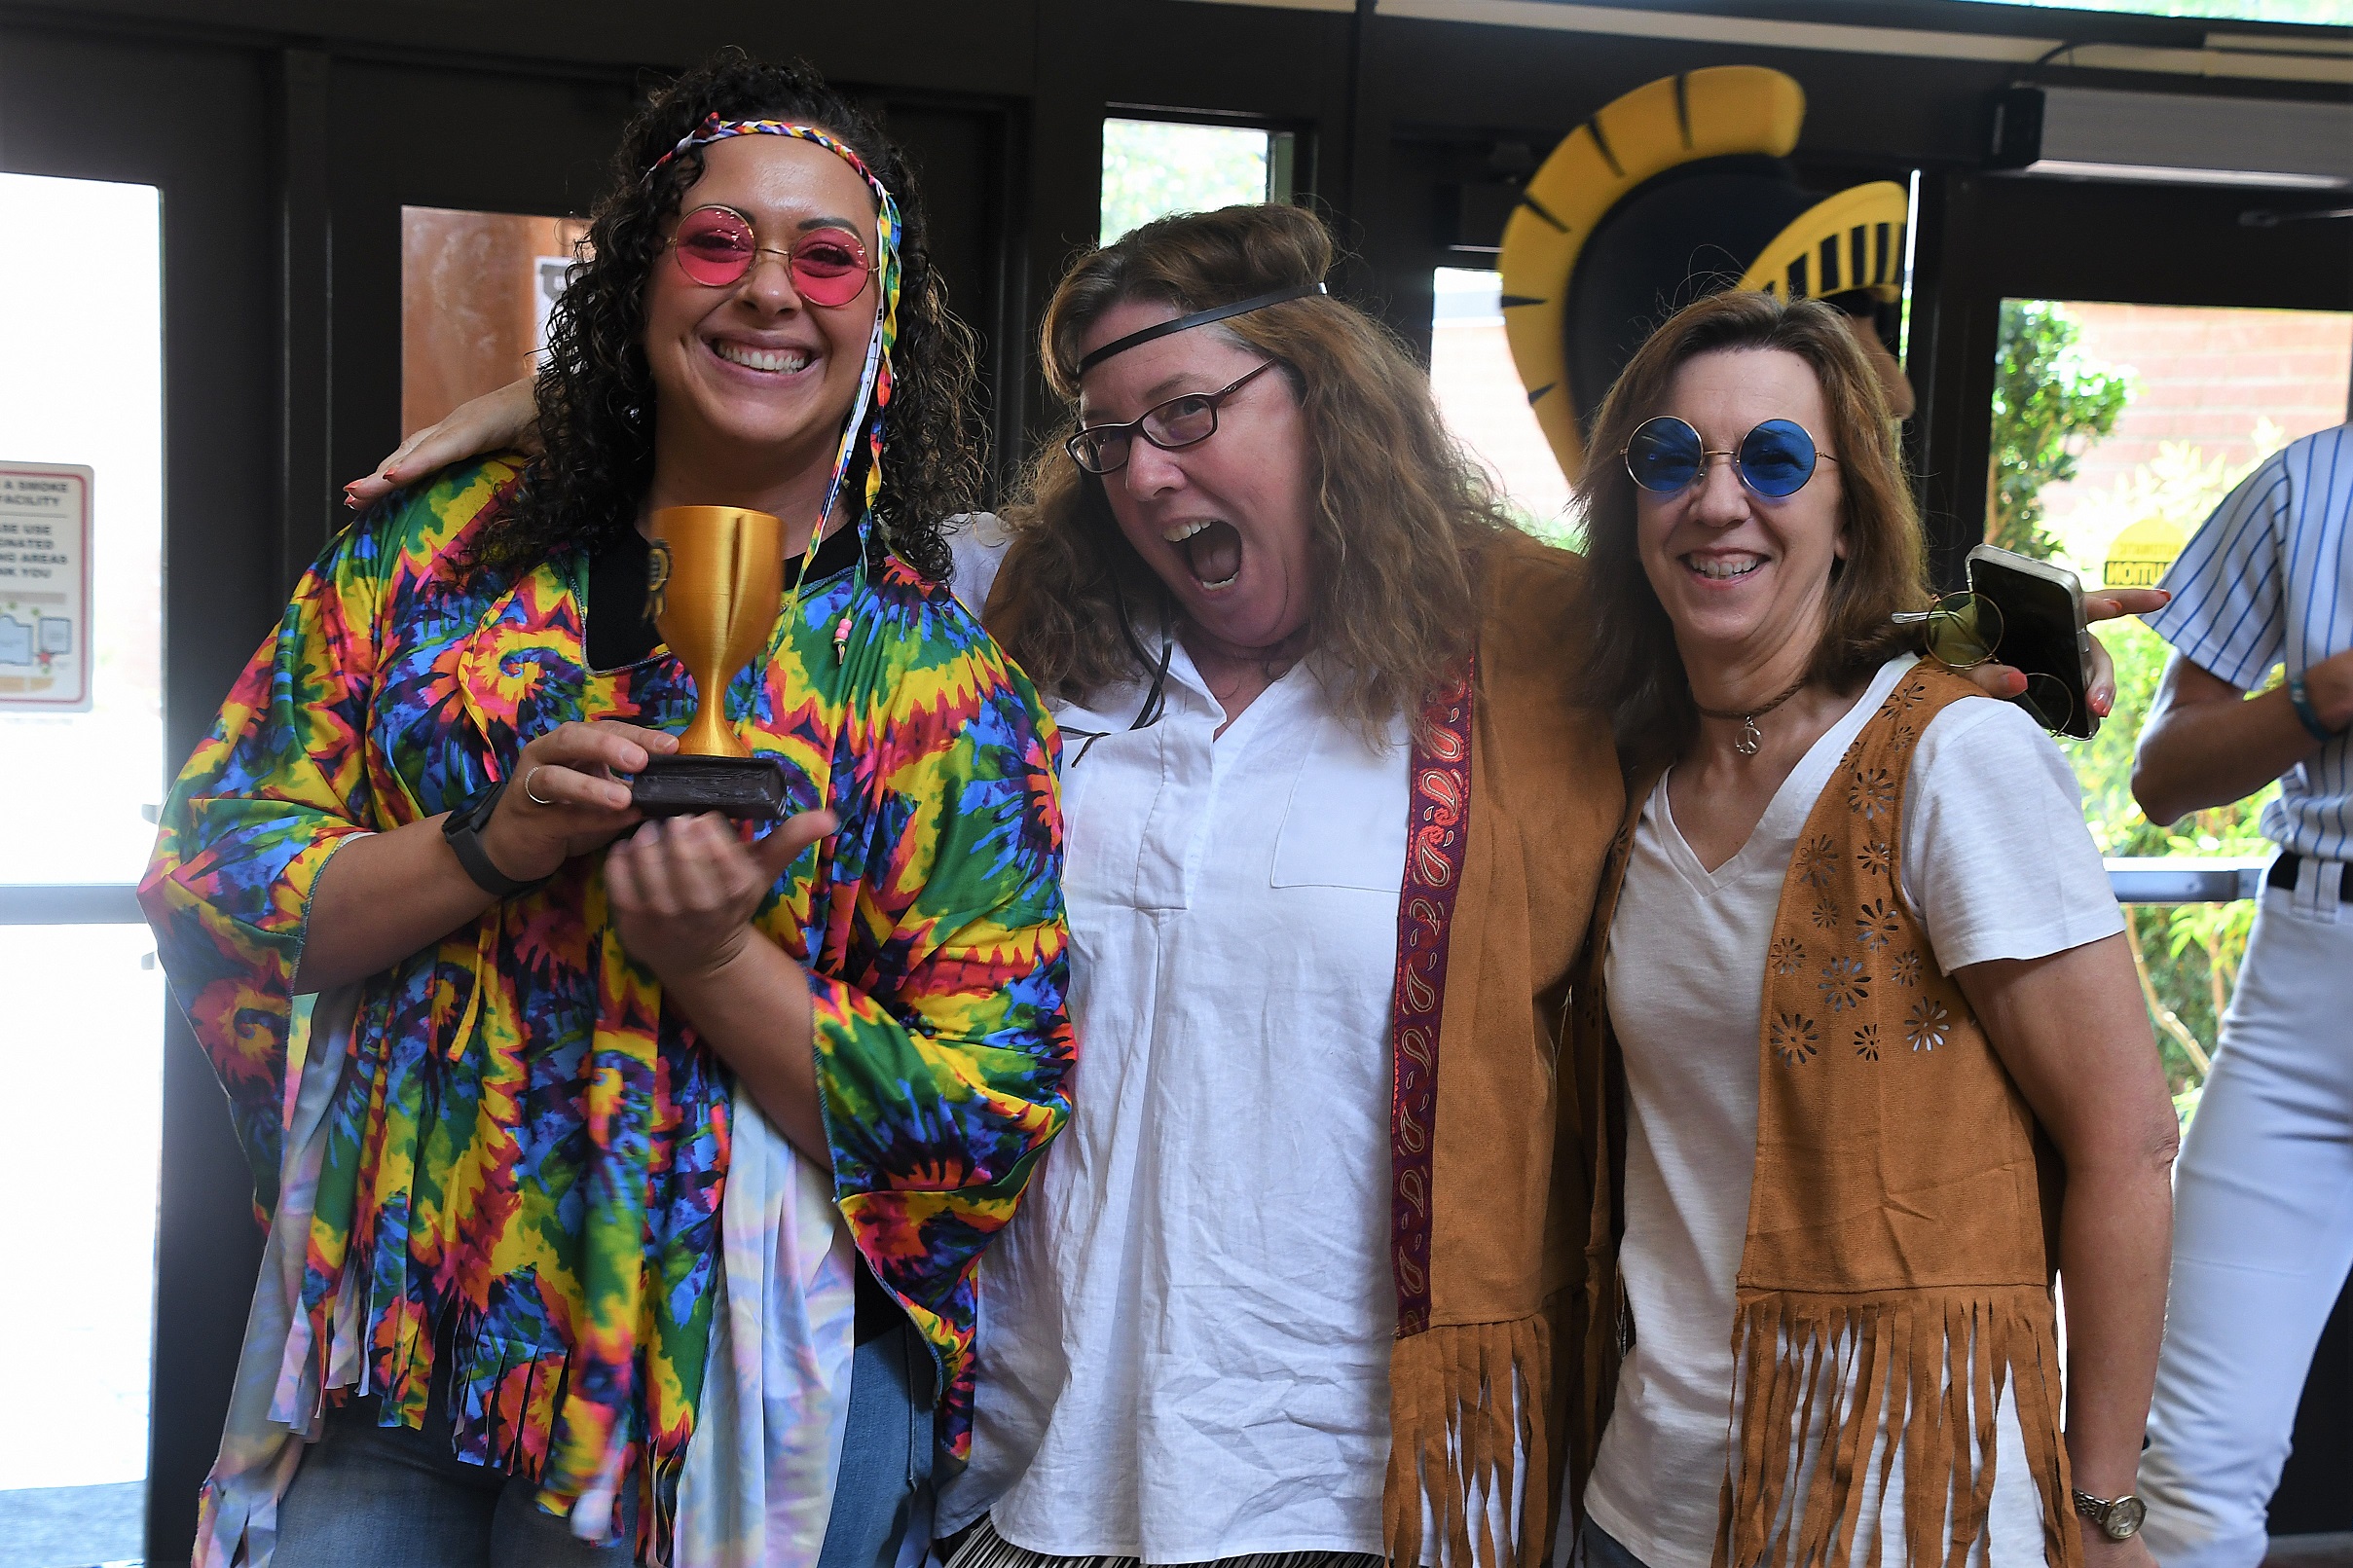 FTCC Foundation staff, dressed in 1960s outfits, hold a trophy for winning the costume contest.